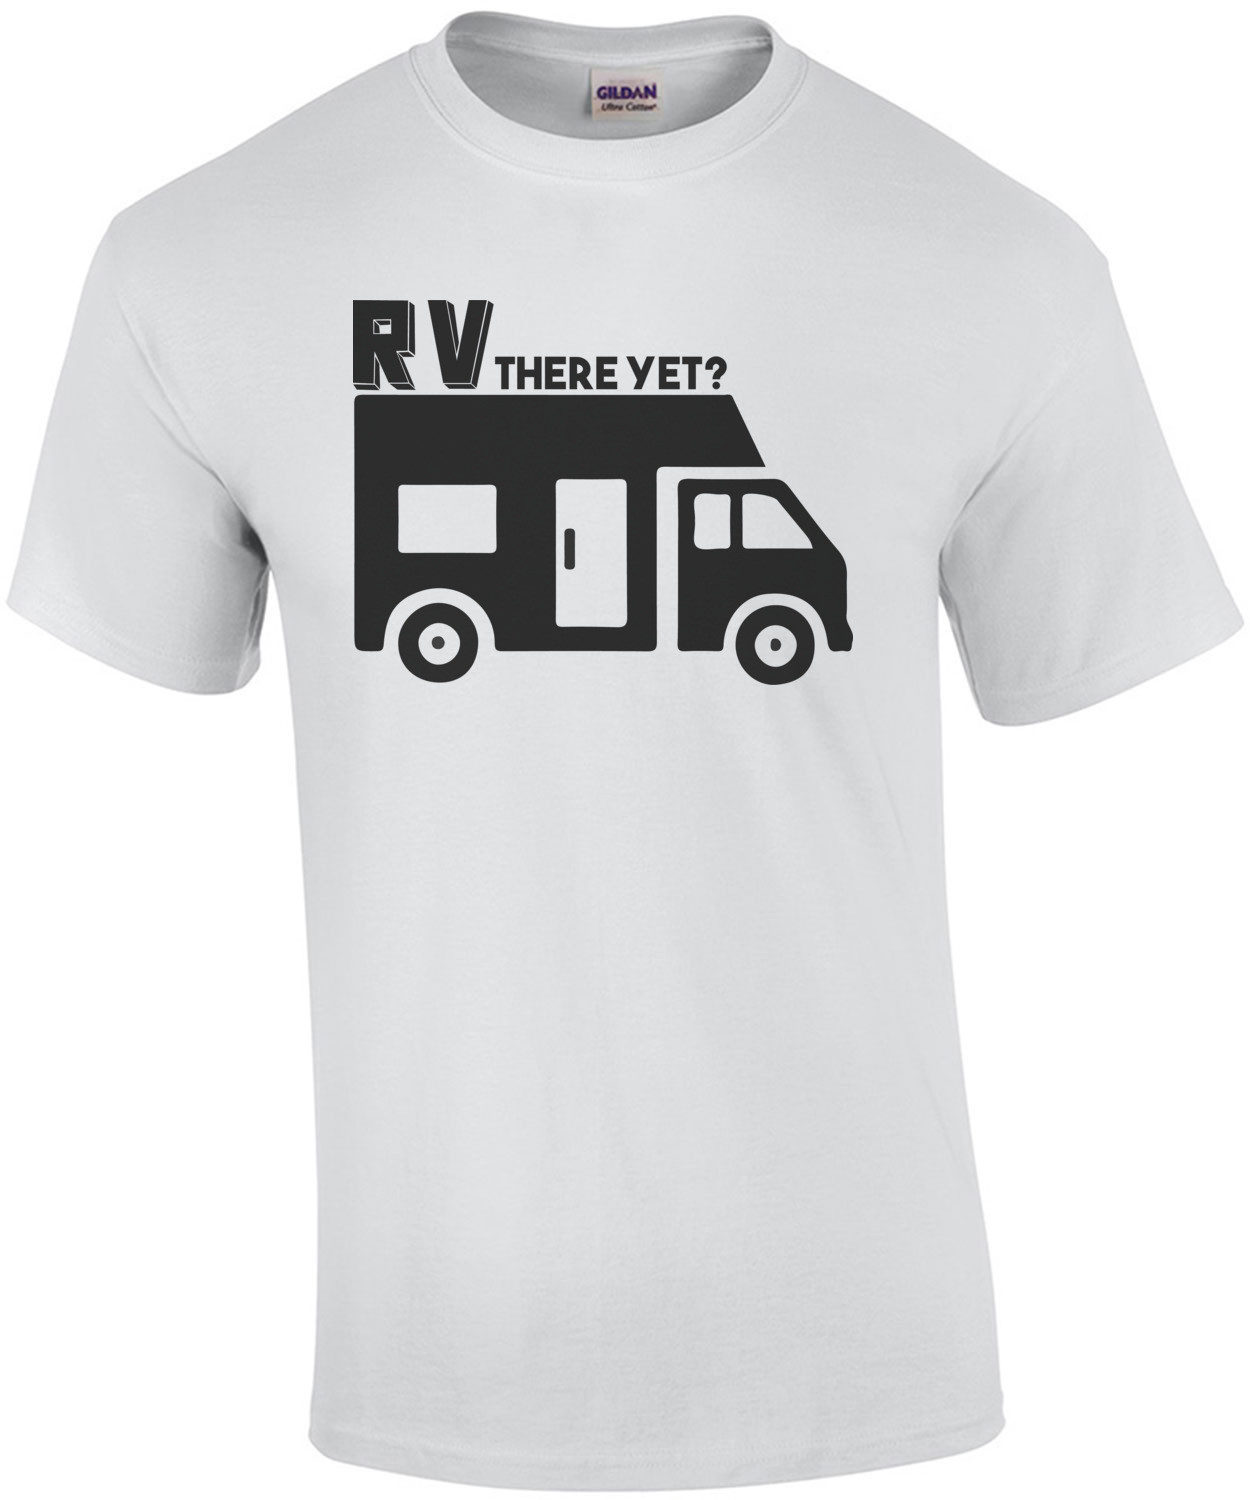 RV there yet? T-Shirt